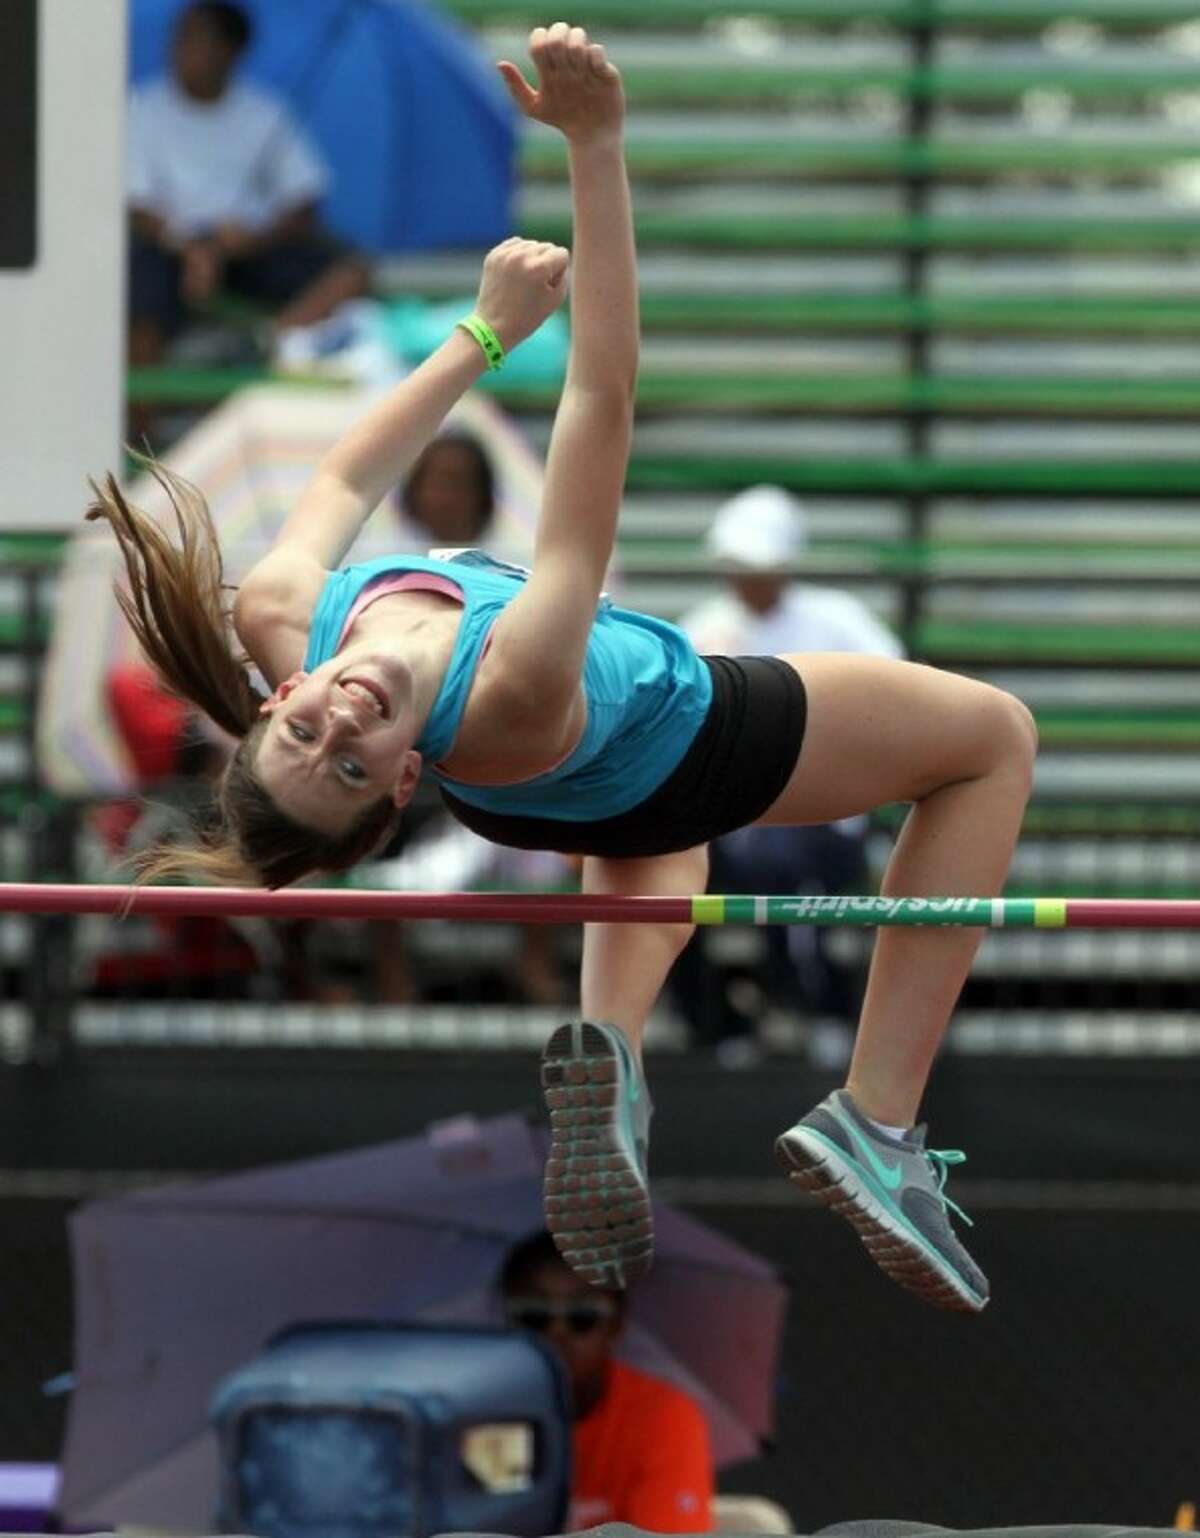 Darcy Sanford clears the bar in the sub-youth girls high jump last Tuesday during the AAU Junior Olympic Games at Turner Stadium in Humble.